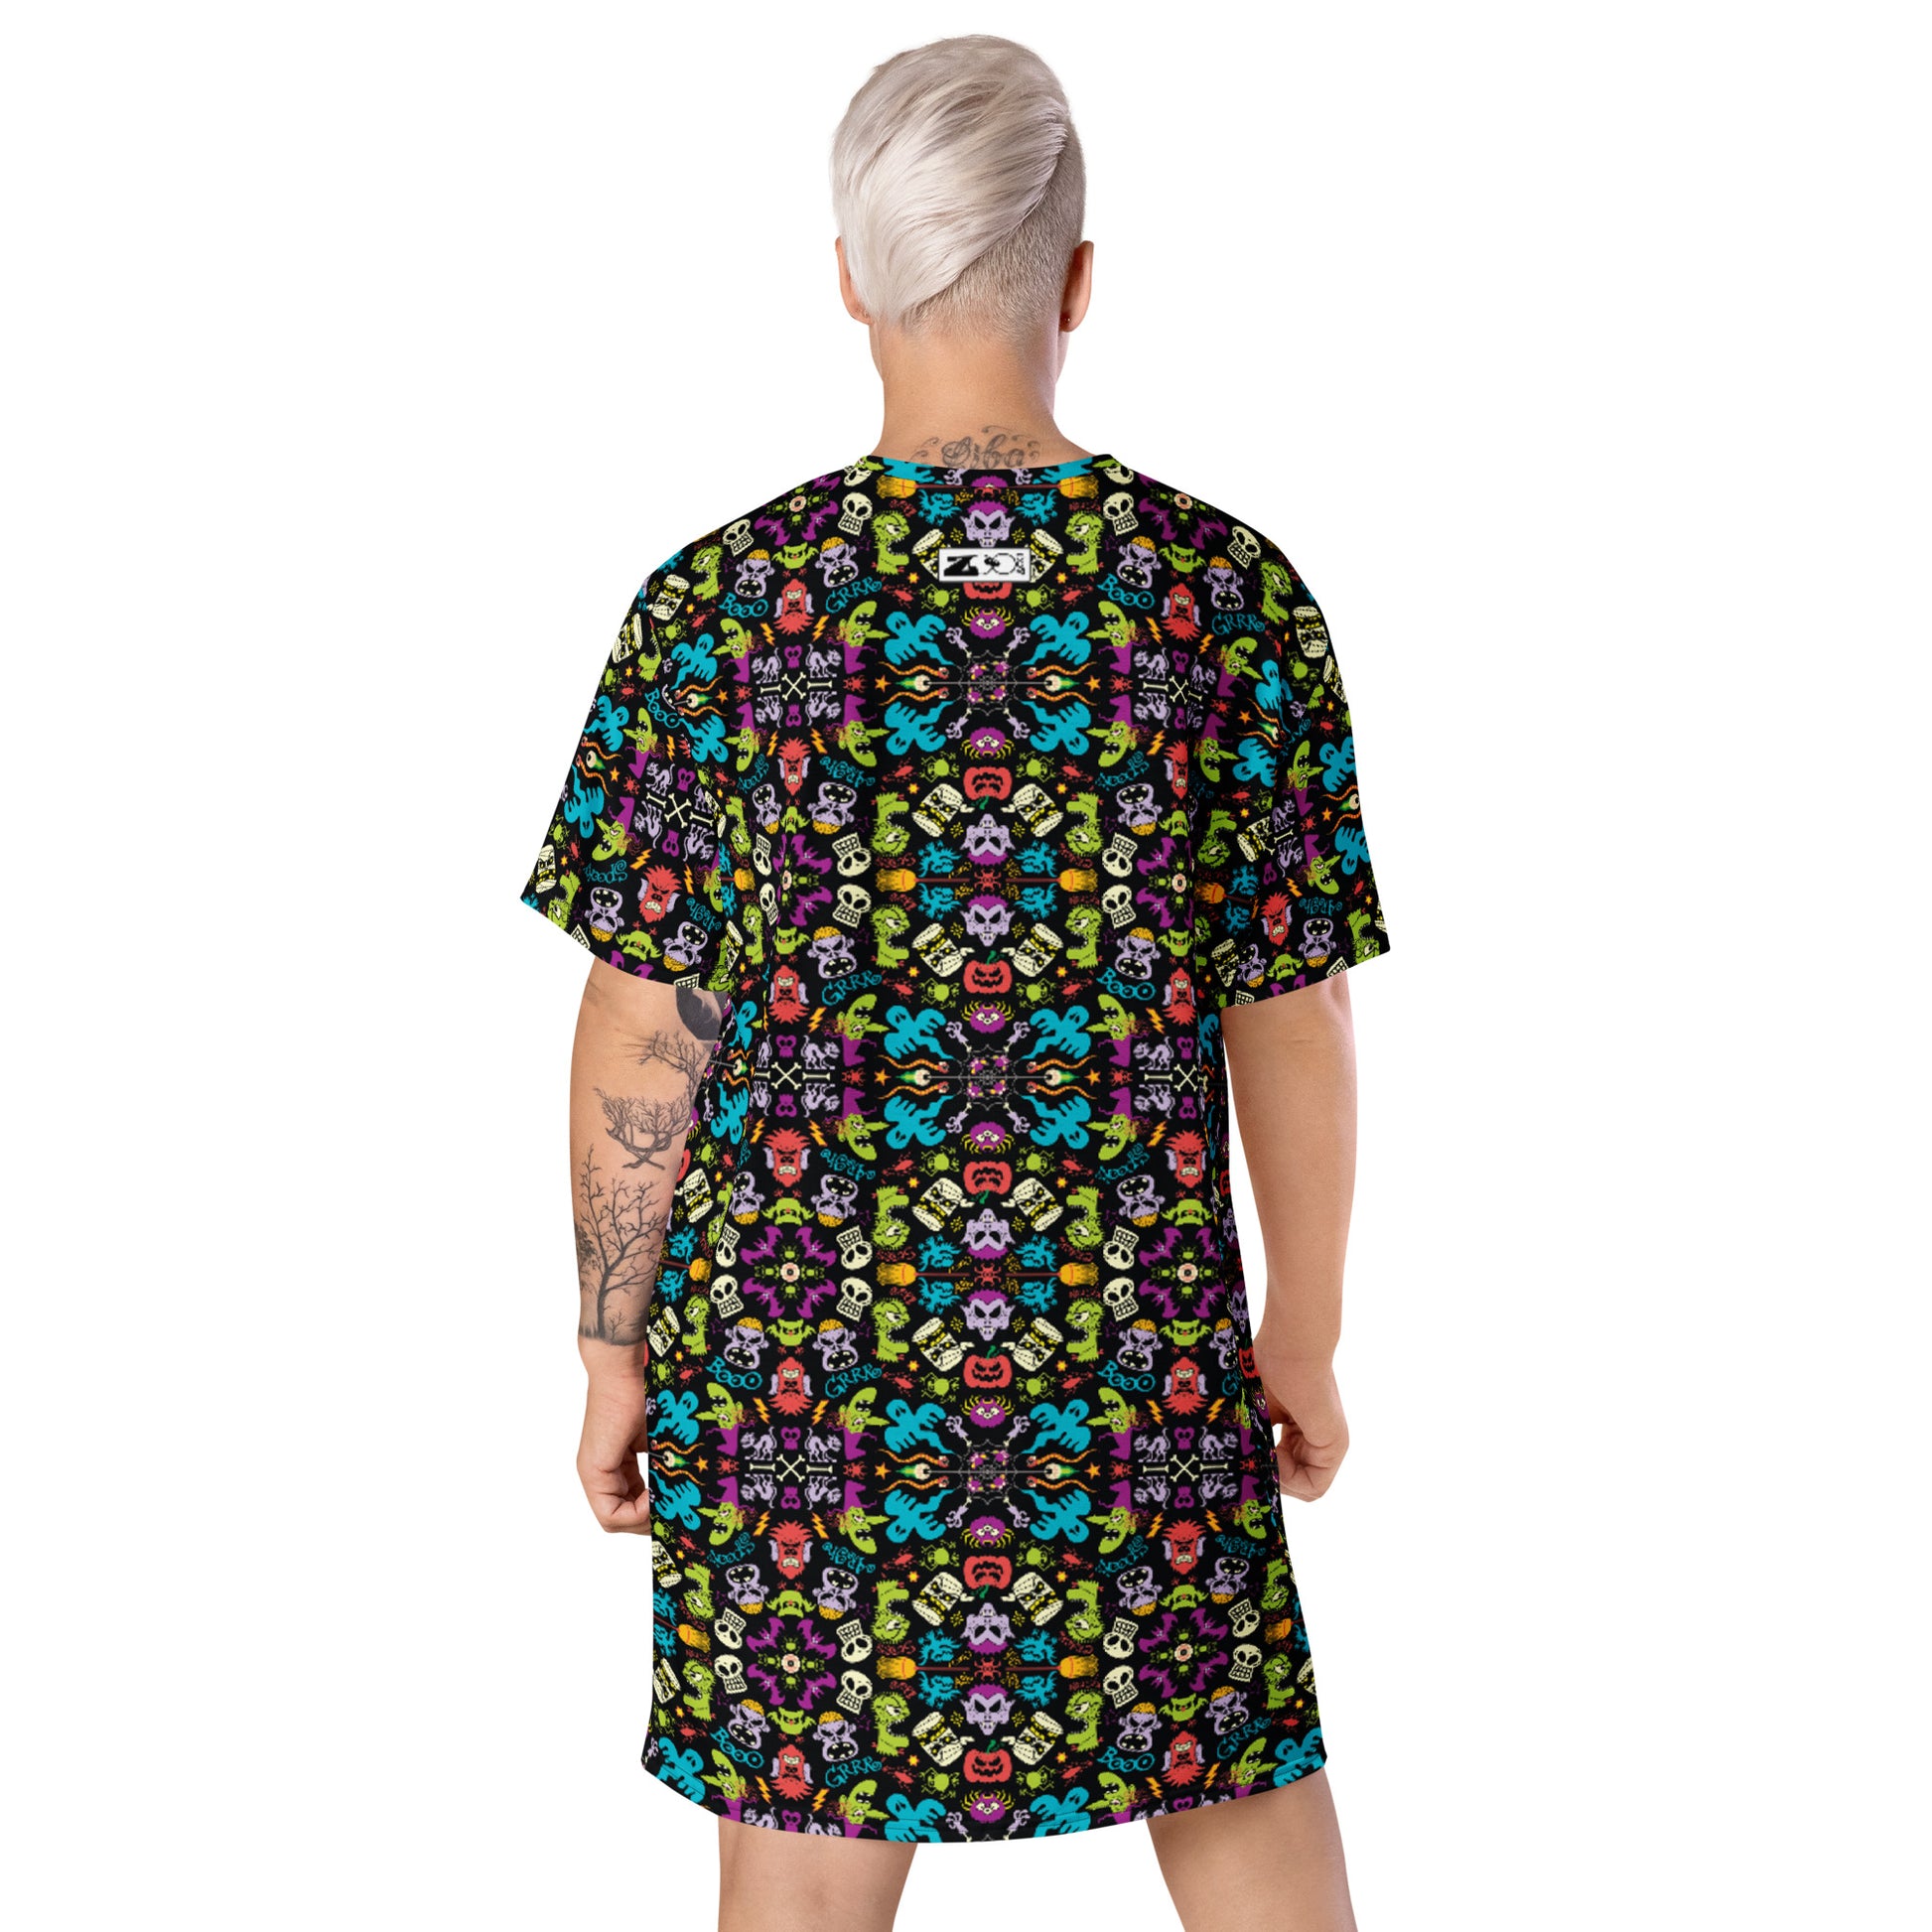 Spooky Halloween characters in a pattern design T-shirt dress. Back view